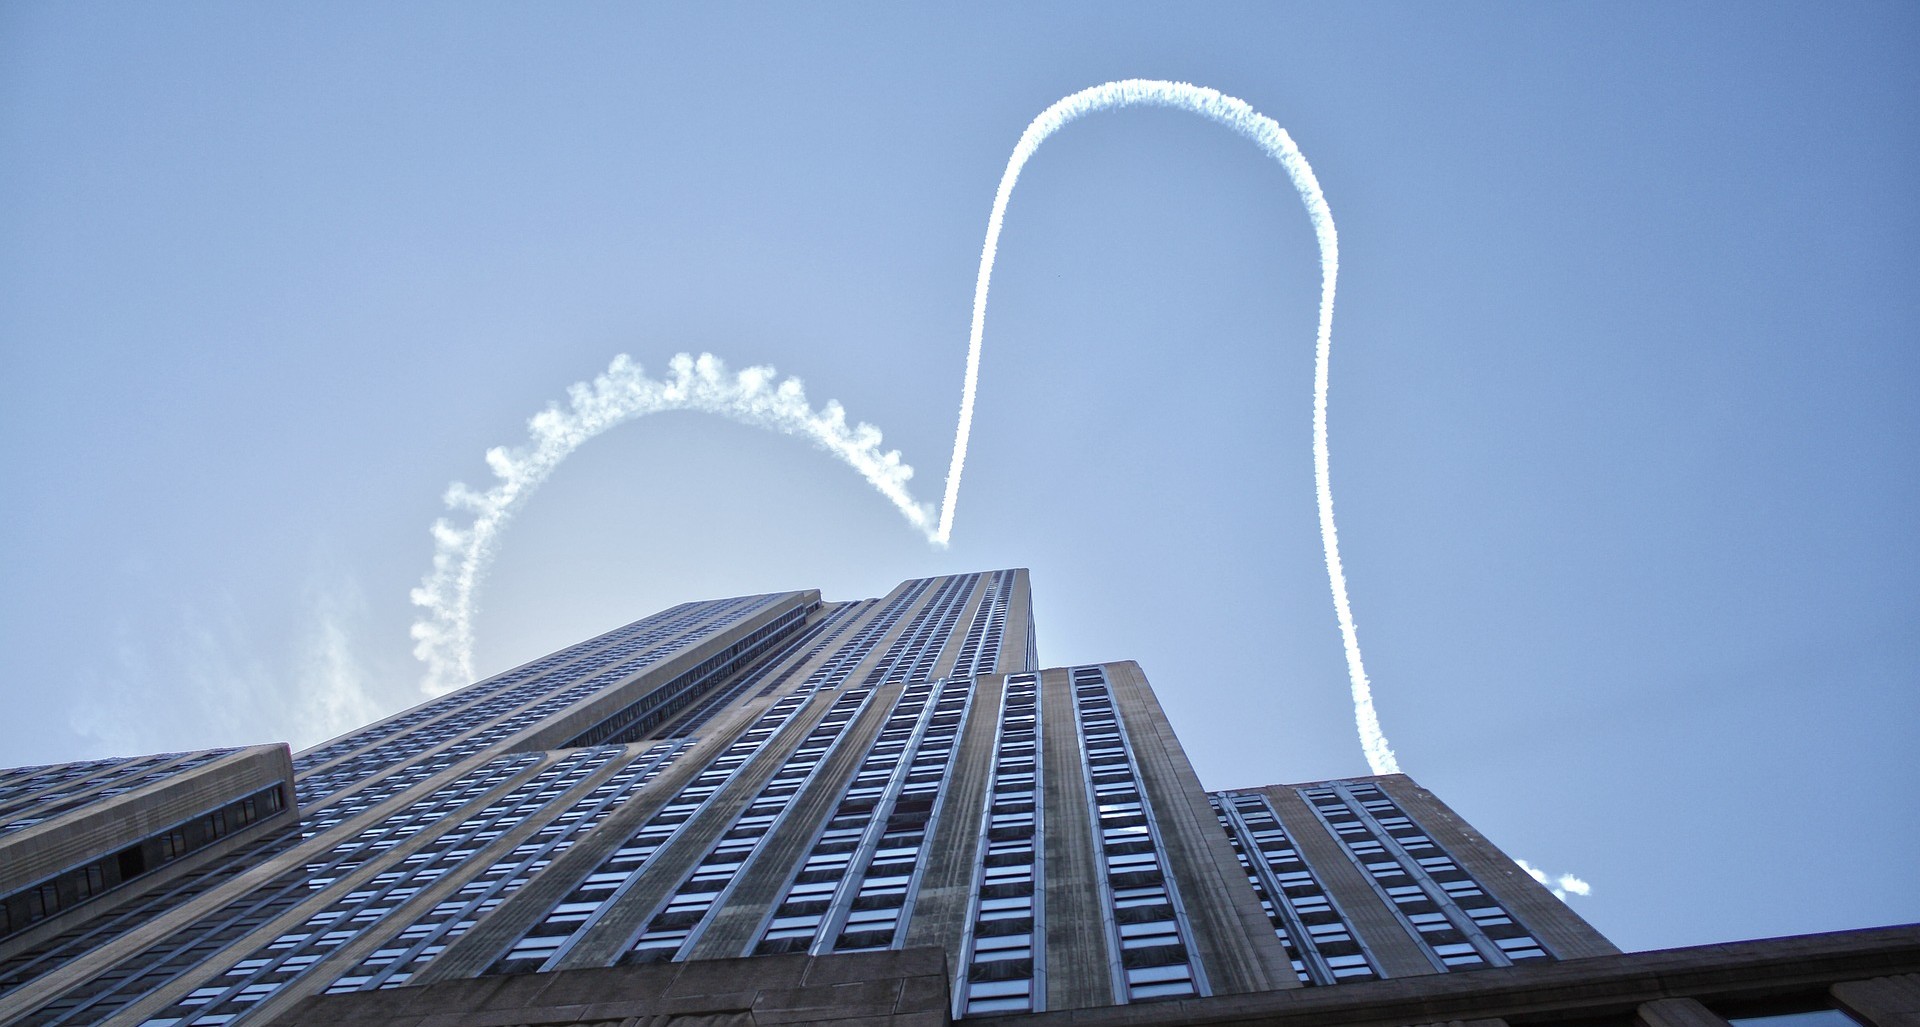 skywriting, empire state building, nyc